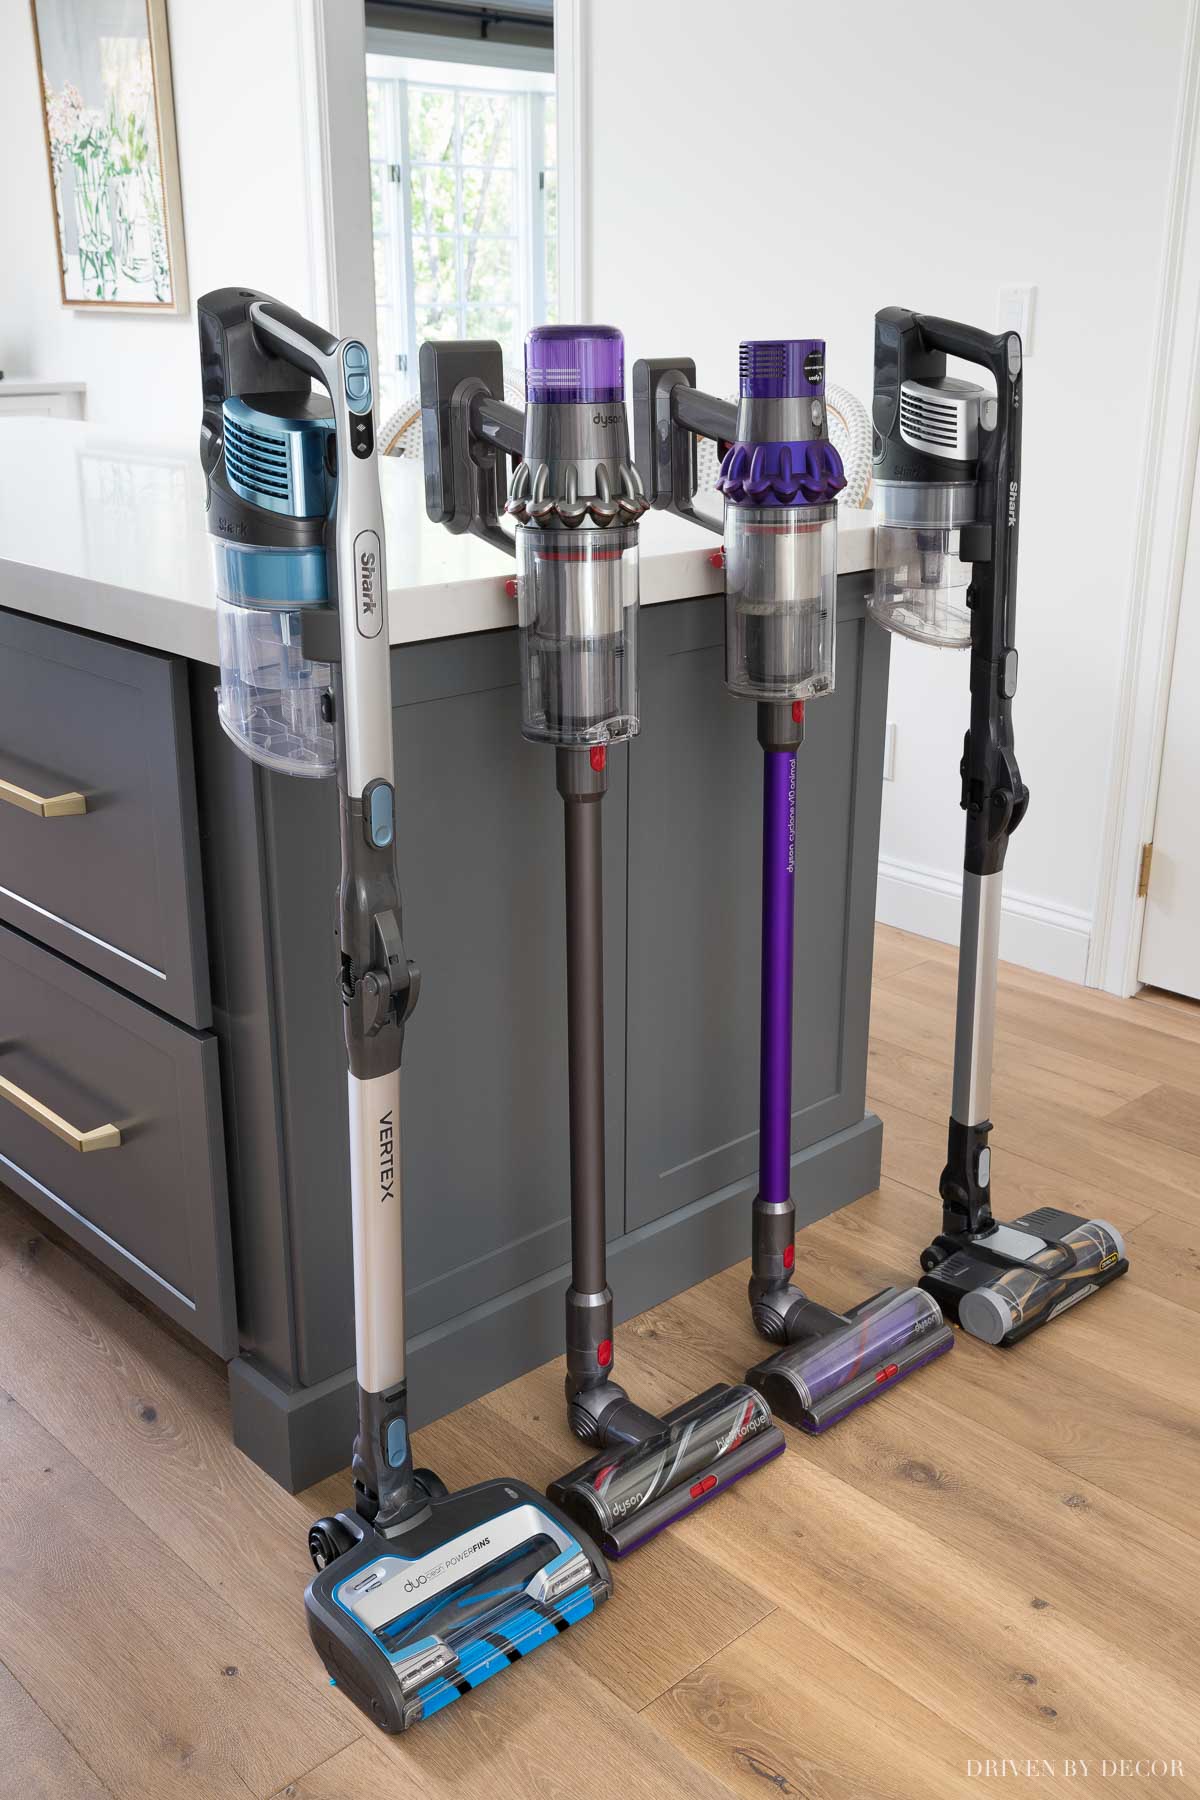 Dyson V6 Review - which vac?